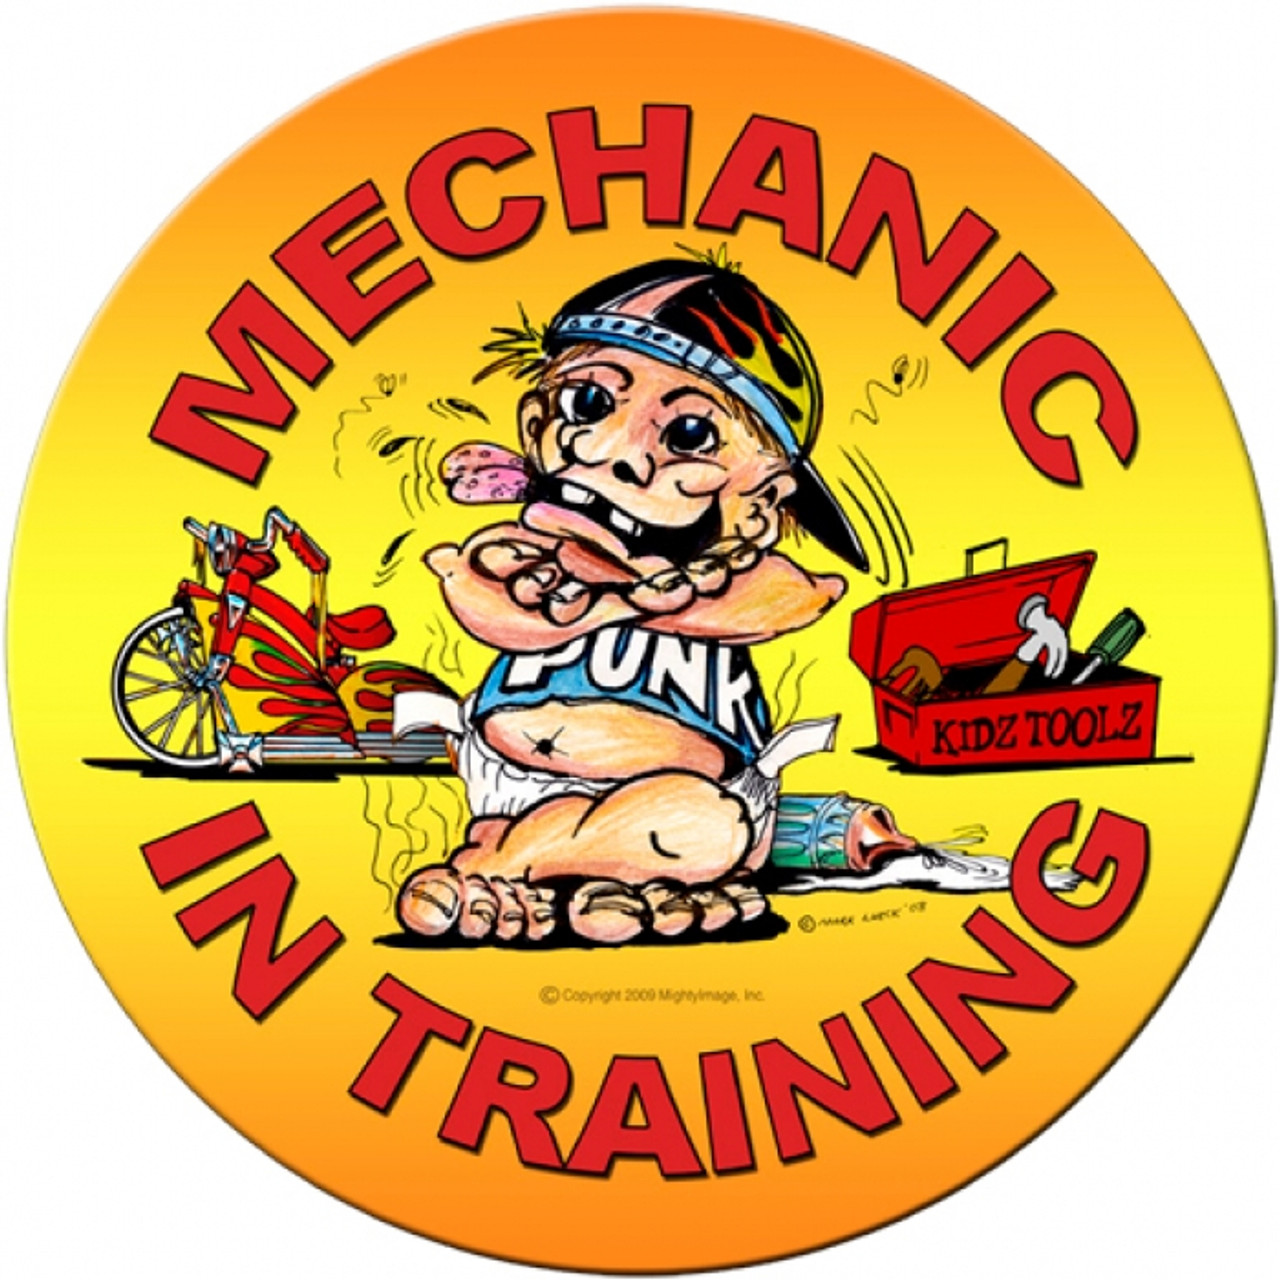 Vintage Mechanic in Training Round Metal Sign 14 x 14 Inches